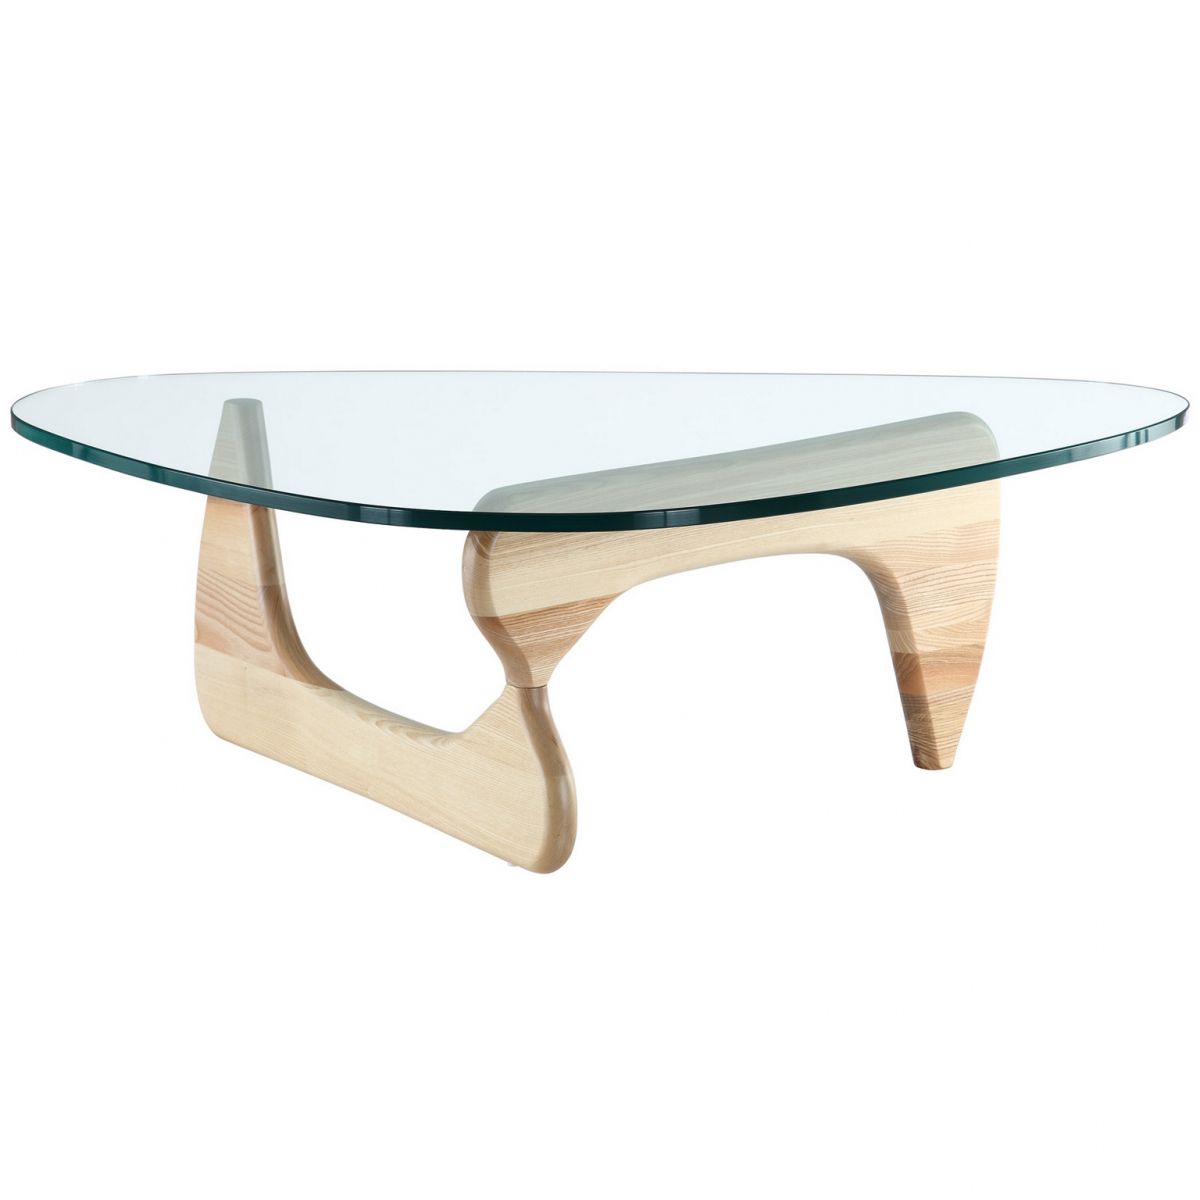 2020 White Triangular Coffee Tables Inside Triangle Coffee Table With Natural Wood Base (View 9 of 20)